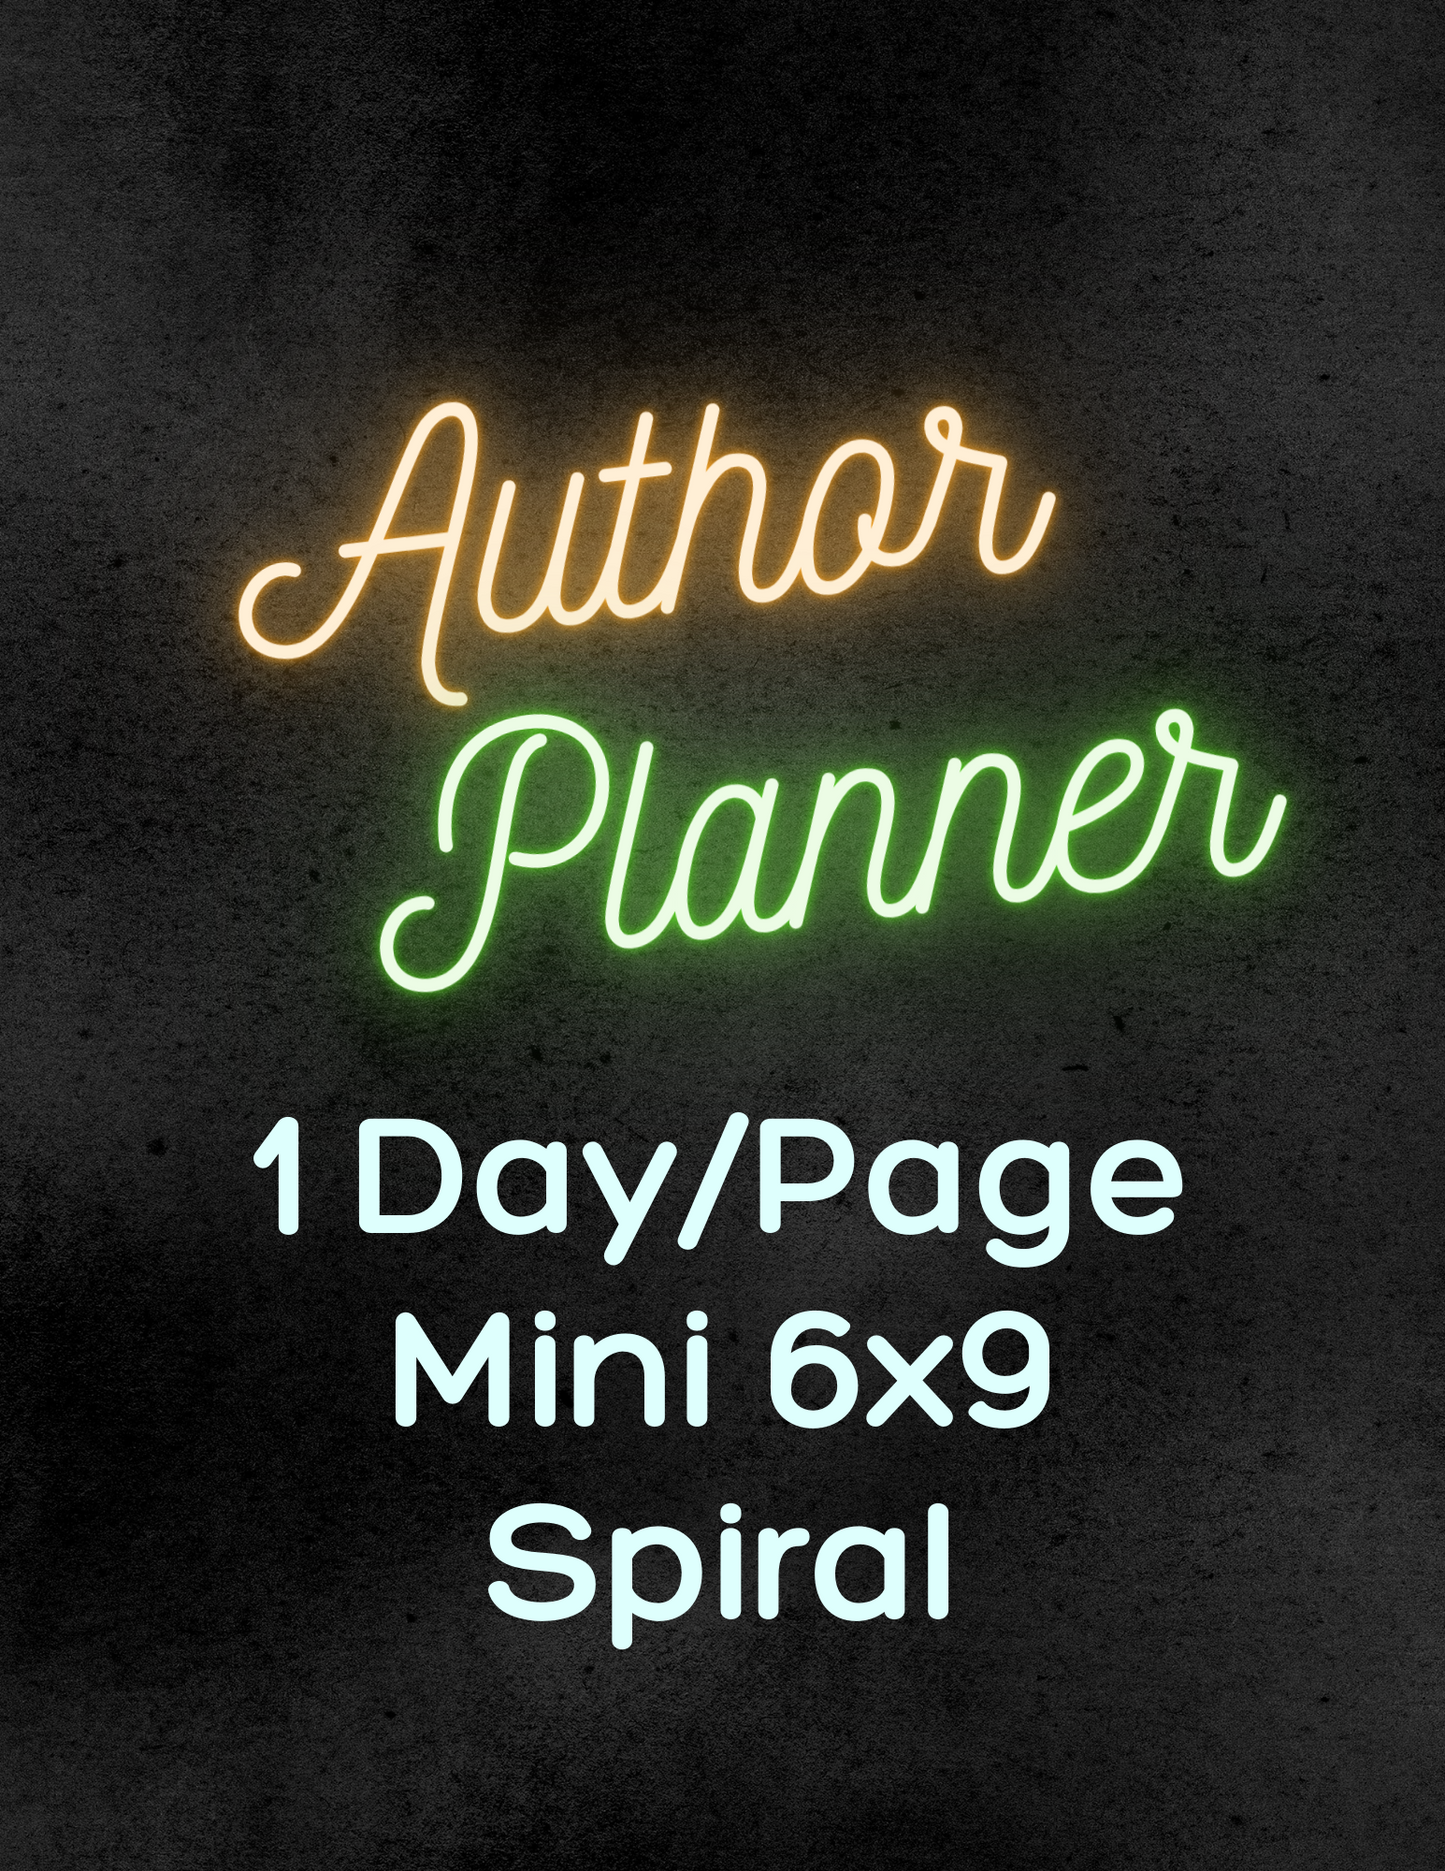 Writing Journal - Word Count + Day Planner